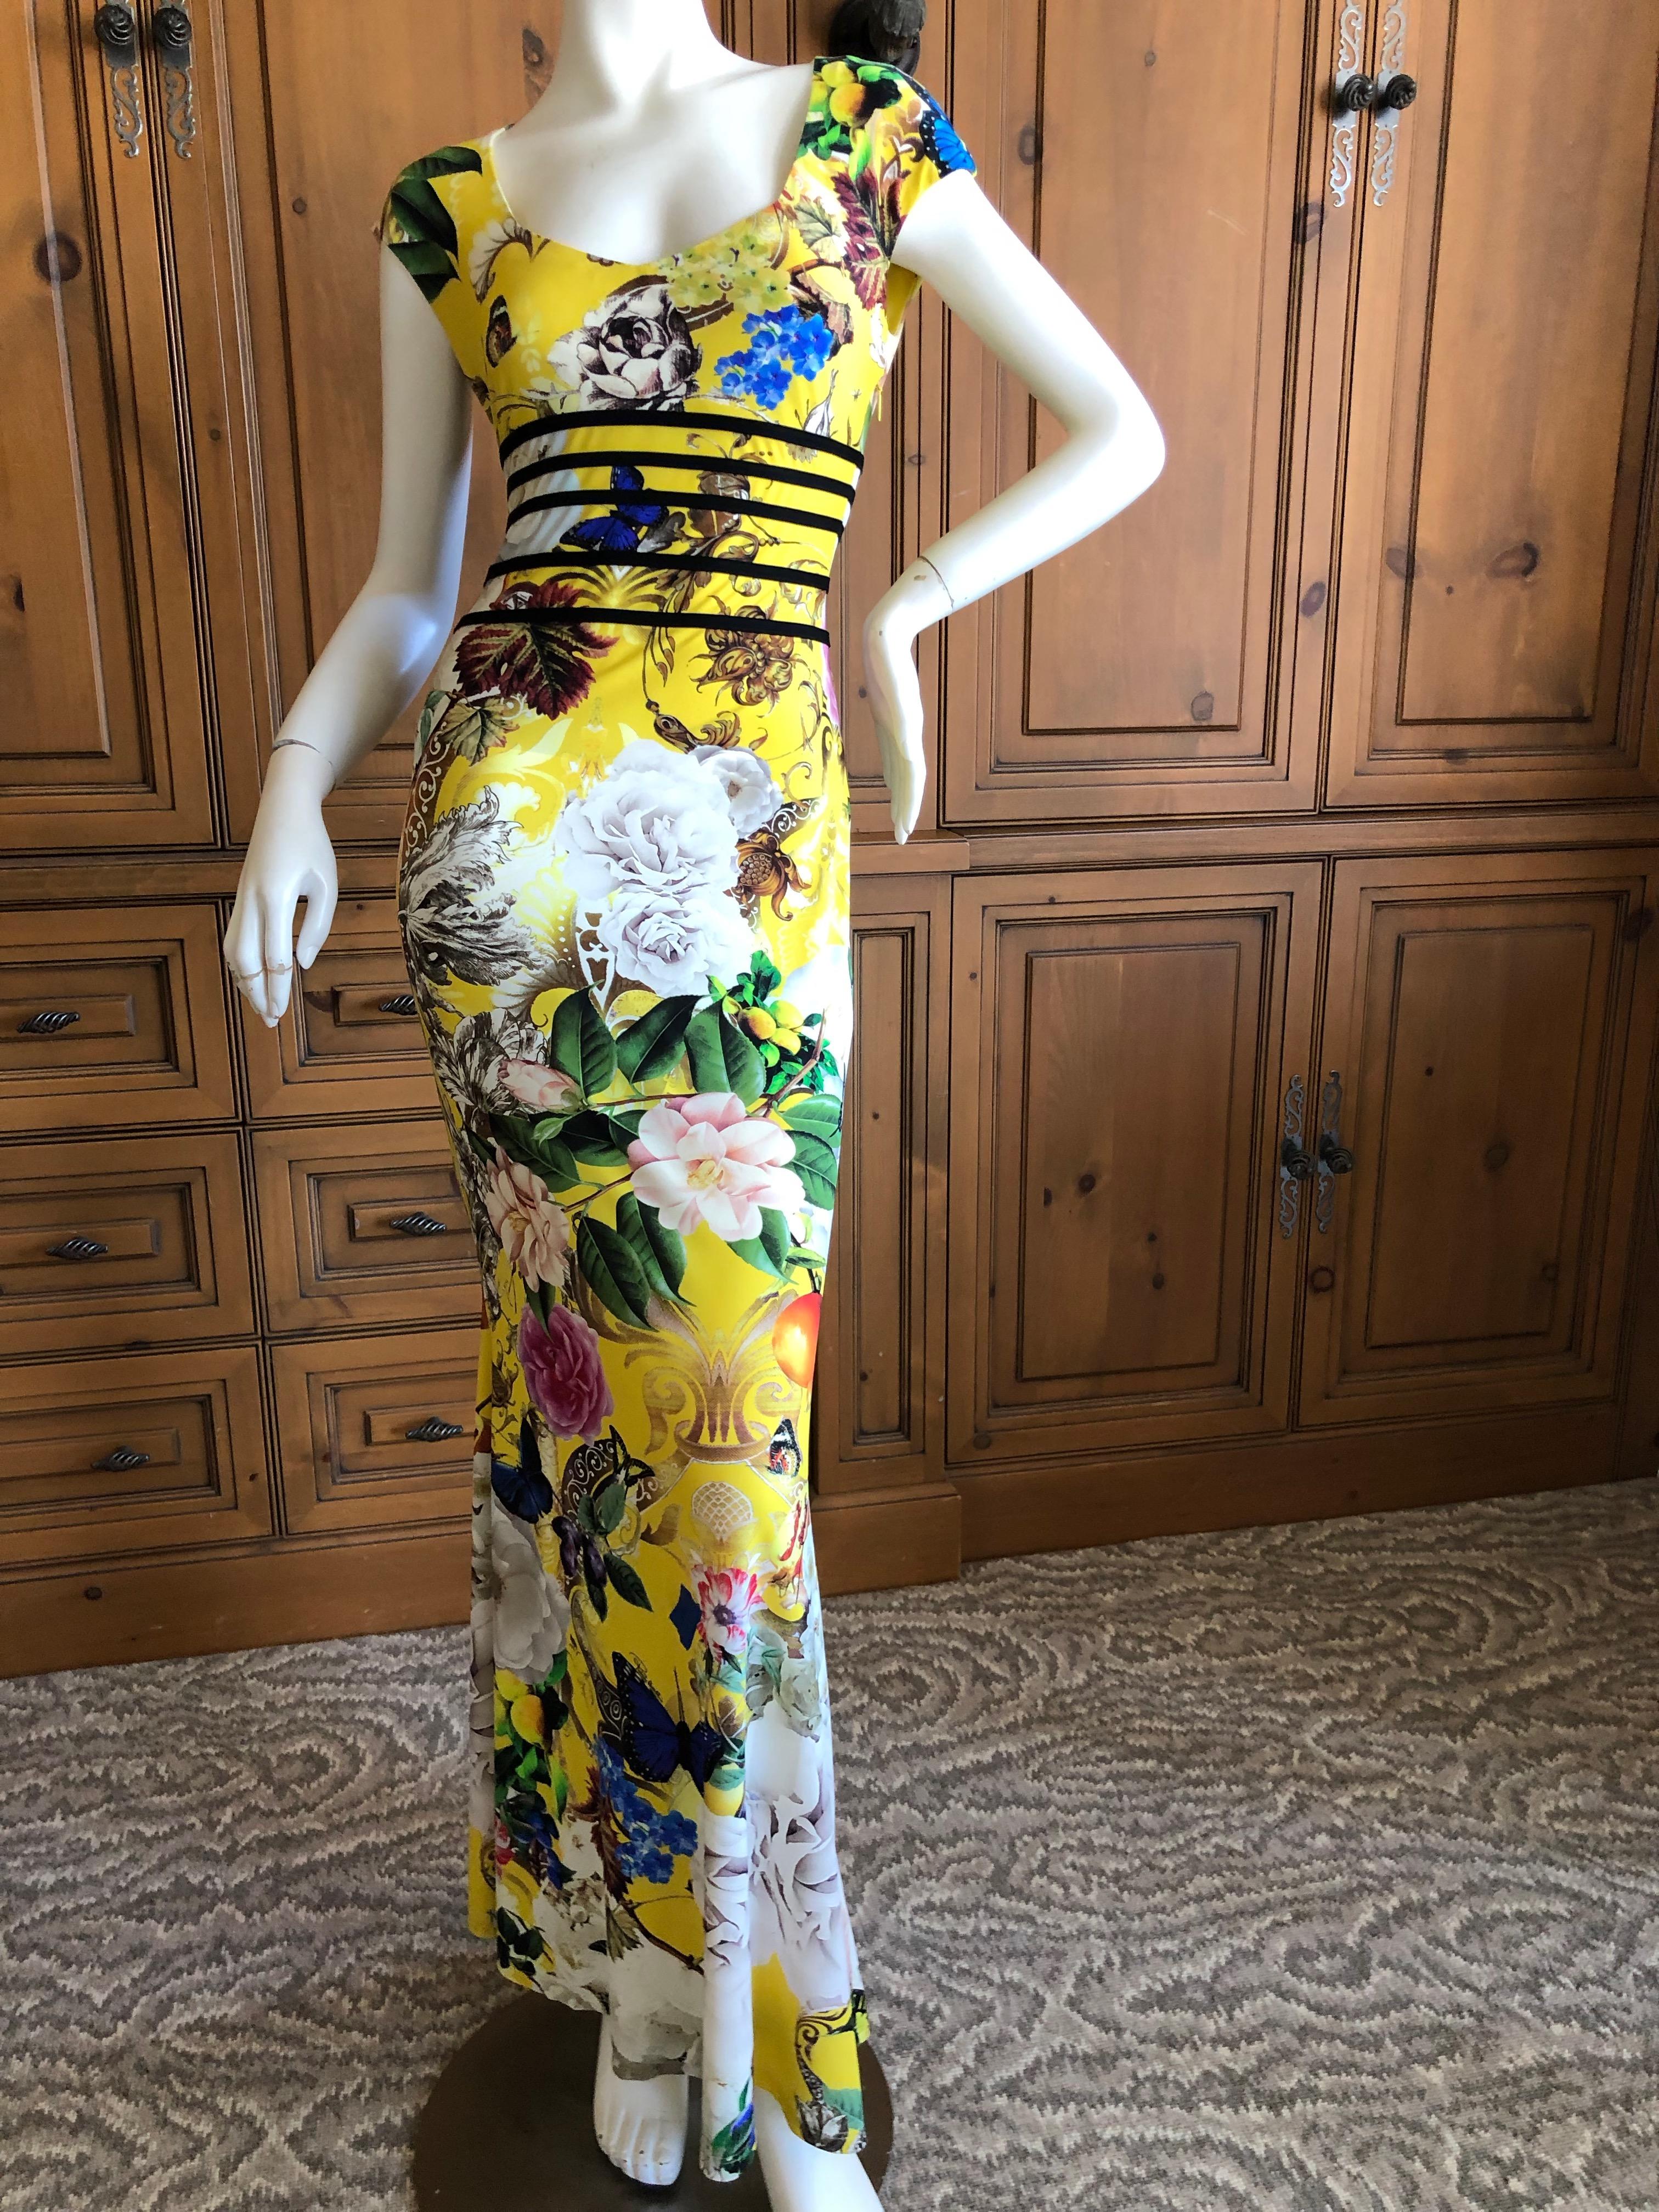 Roberto Cavalli  Silk Chinoiserie Style Floral Dress 
Size 40, there is a lot of stretch
Bust 38